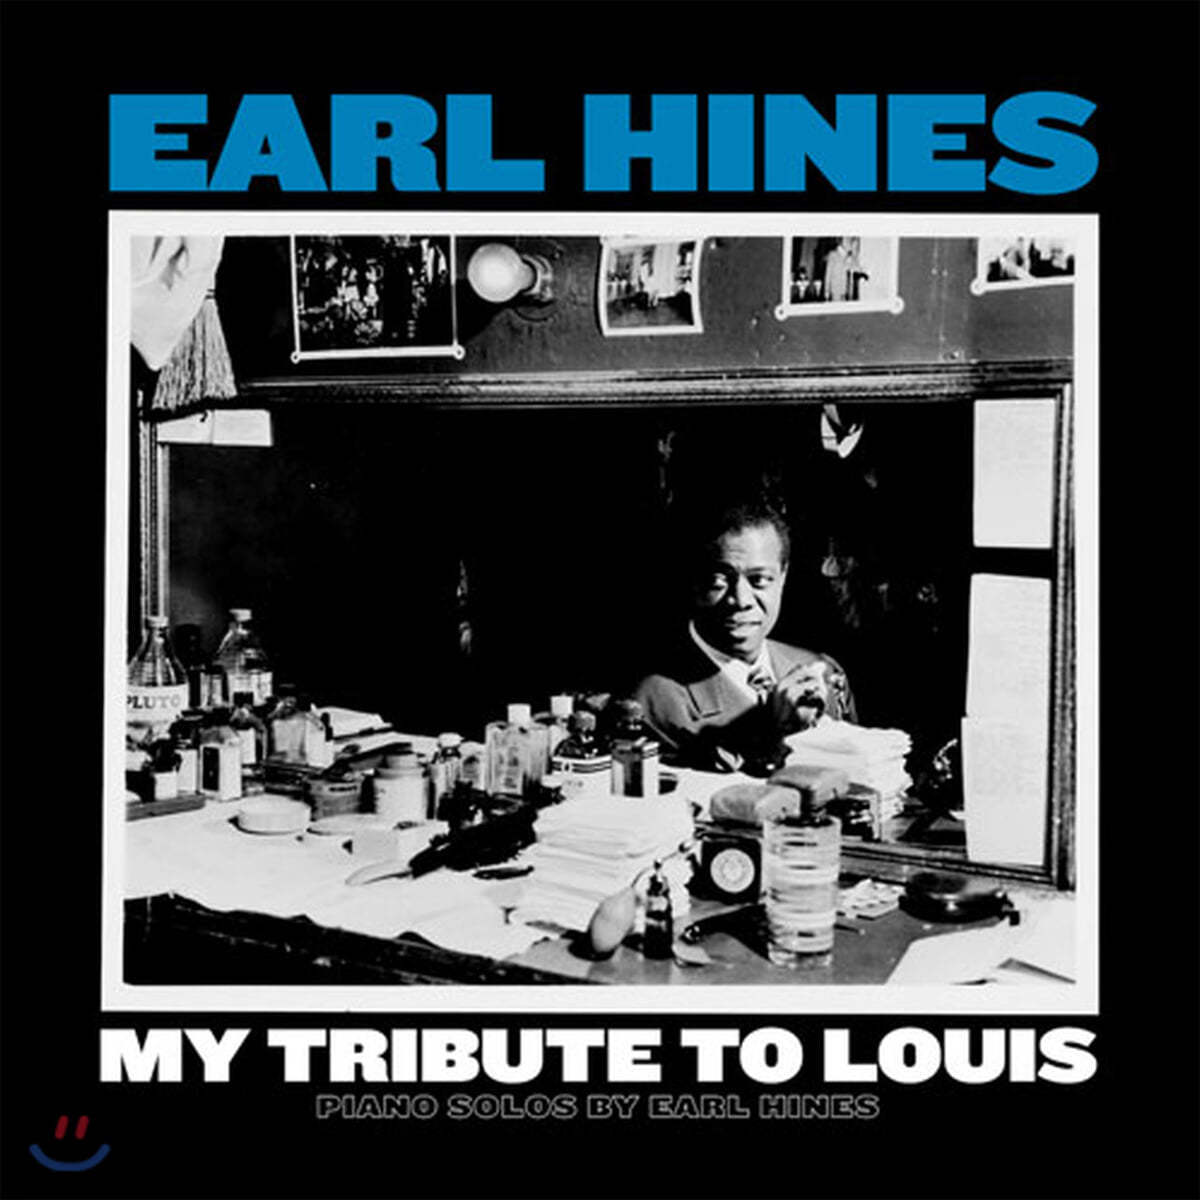 Earl Hines (얼 하인즈) - My Tribute to Louis: Piano Solos by Earl Hines [LP]